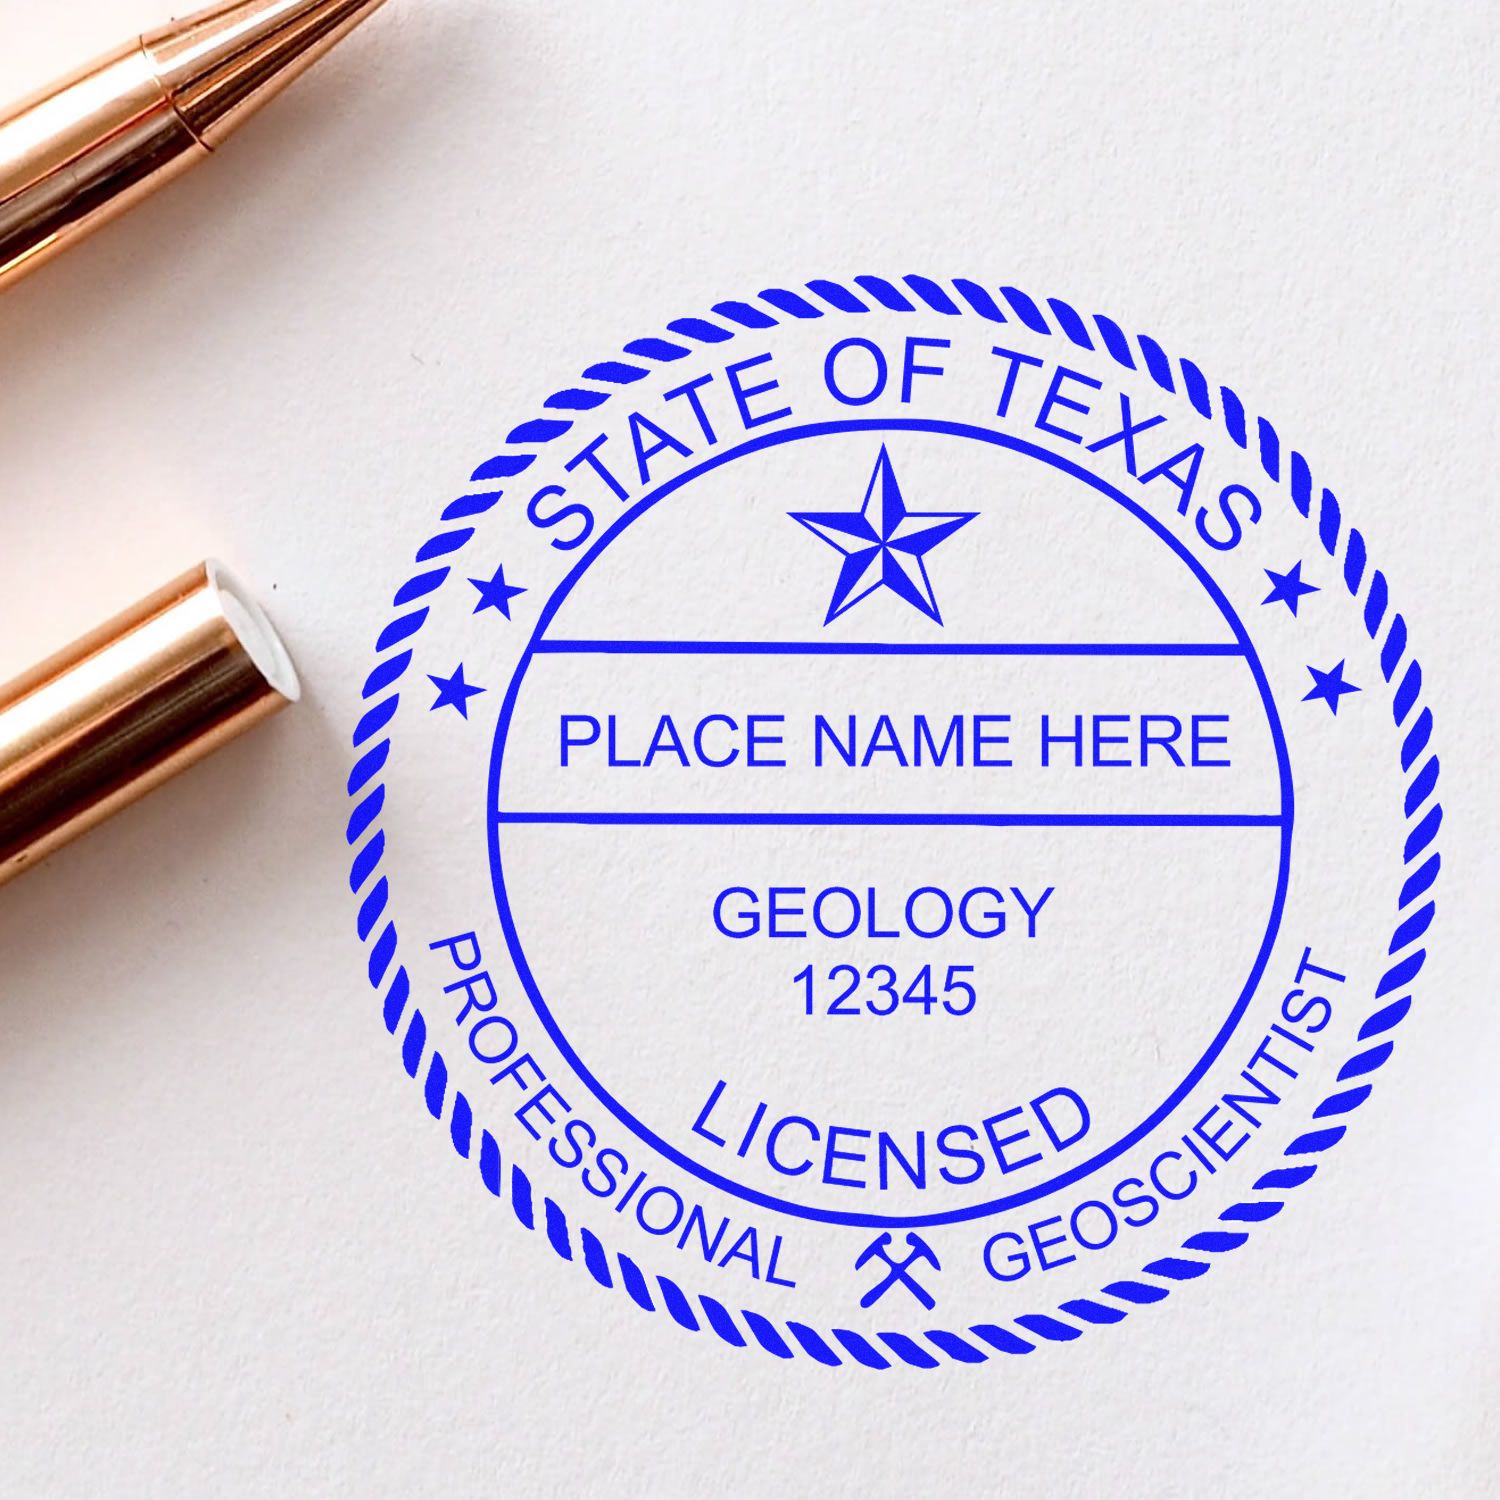 An alternative view of the Texas Professional Geologist Seal Stamp stamped on a sheet of paper showing the image in use